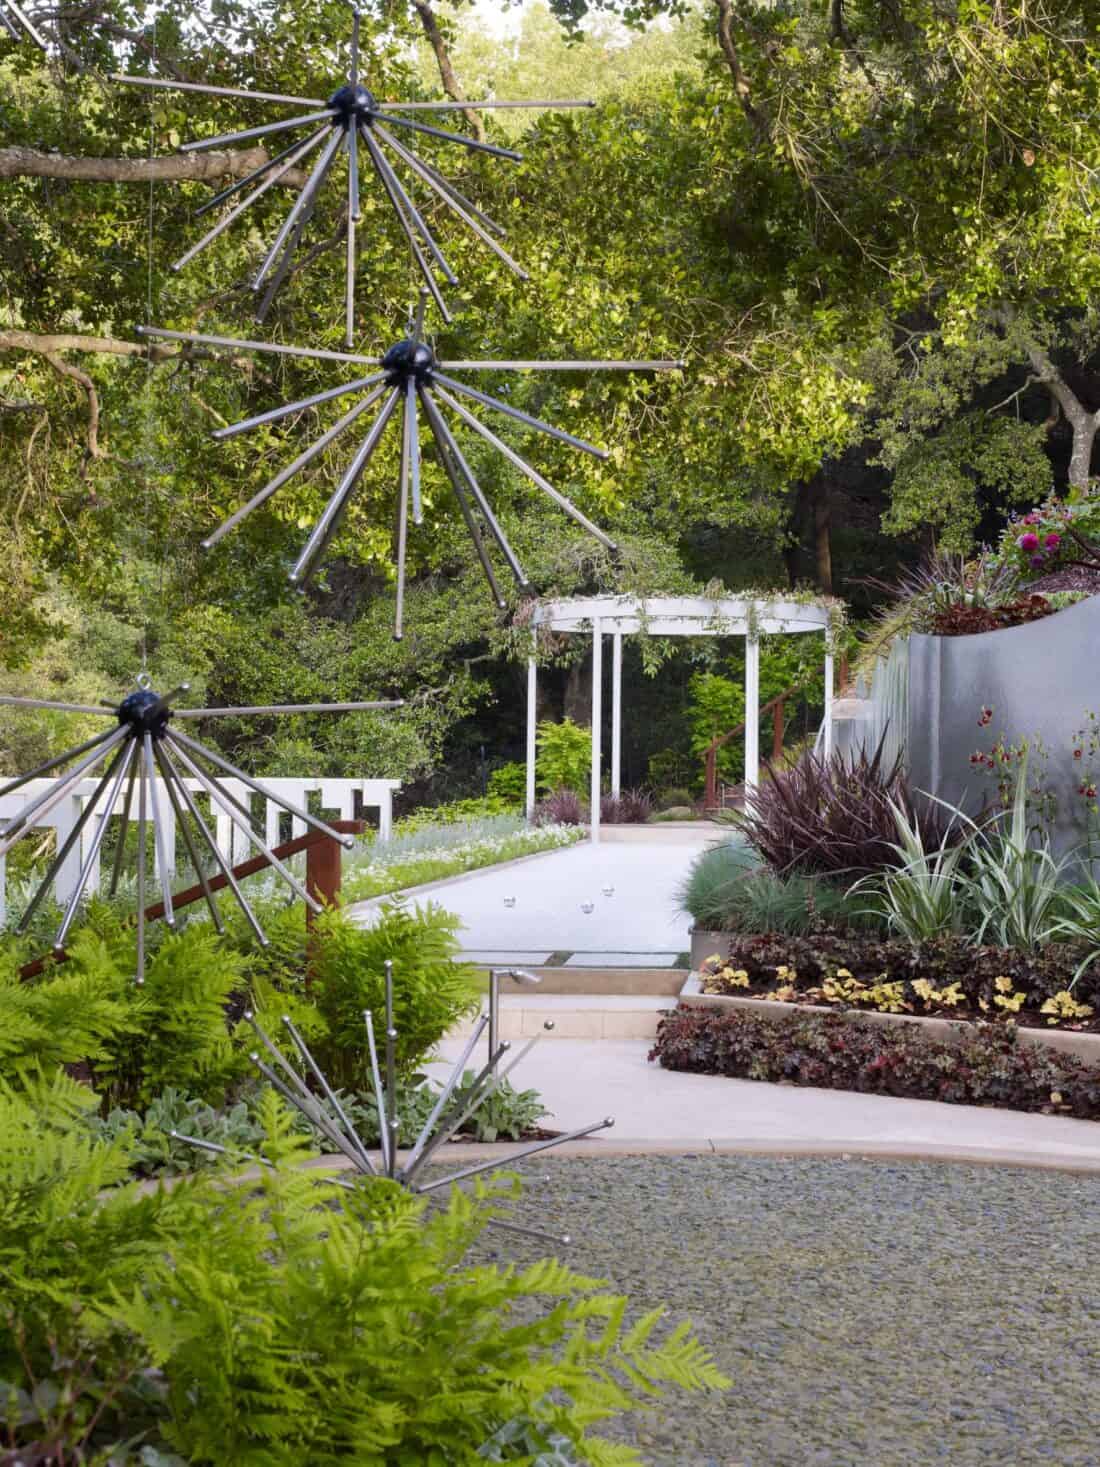         A tranquil garden pathway in the Garden Gallery of Los Gatos features modern, starburst metal sculptures hanging and placed on the ground. The path leads to a white pergola surrounded by lush greenery and a variety of plants, including ferns and succulents. Trees and bushes create a serene backdrop.